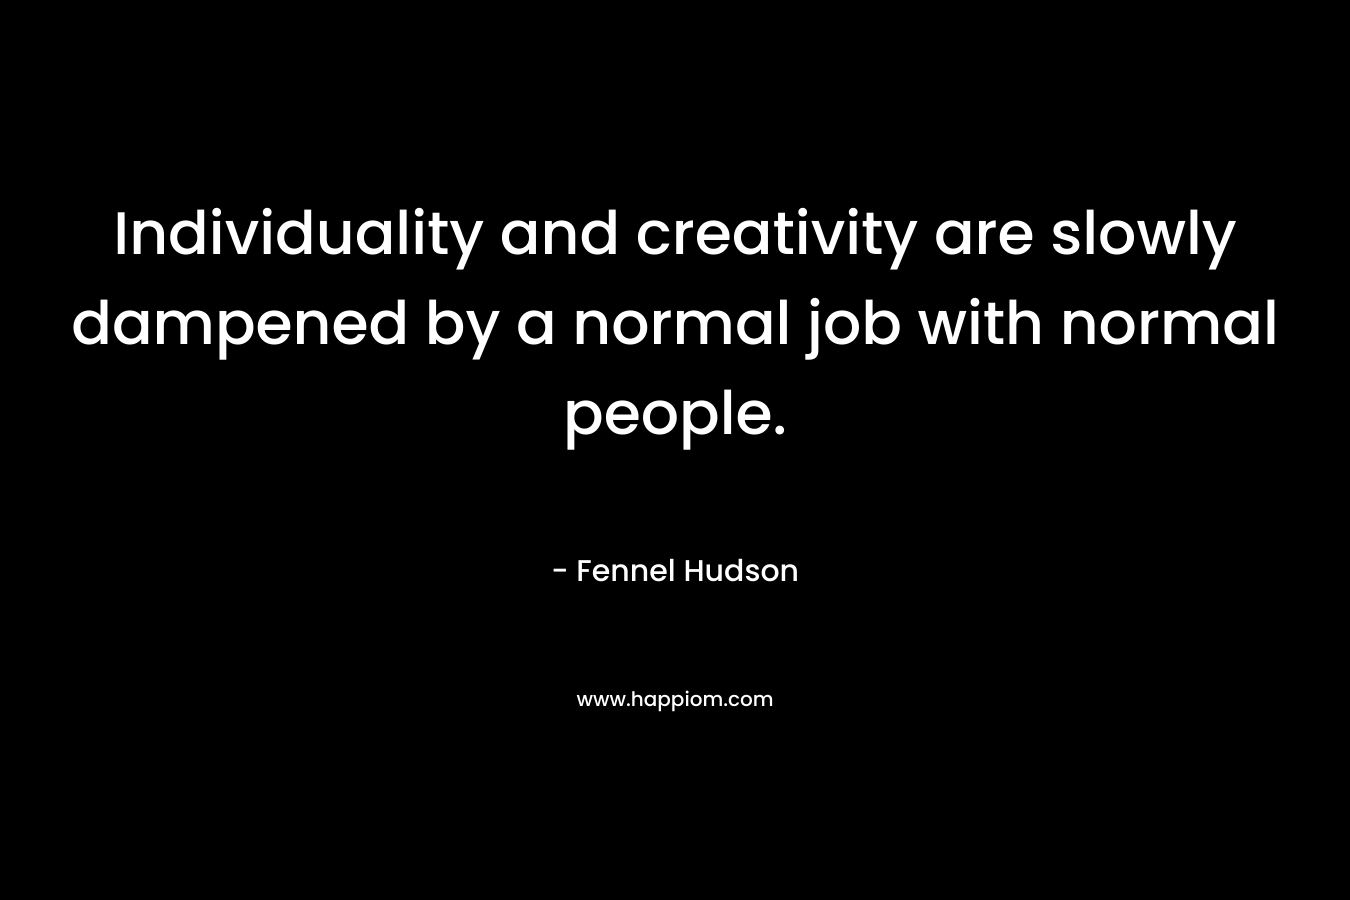 Individuality and creativity are slowly dampened by a normal job with normal people.